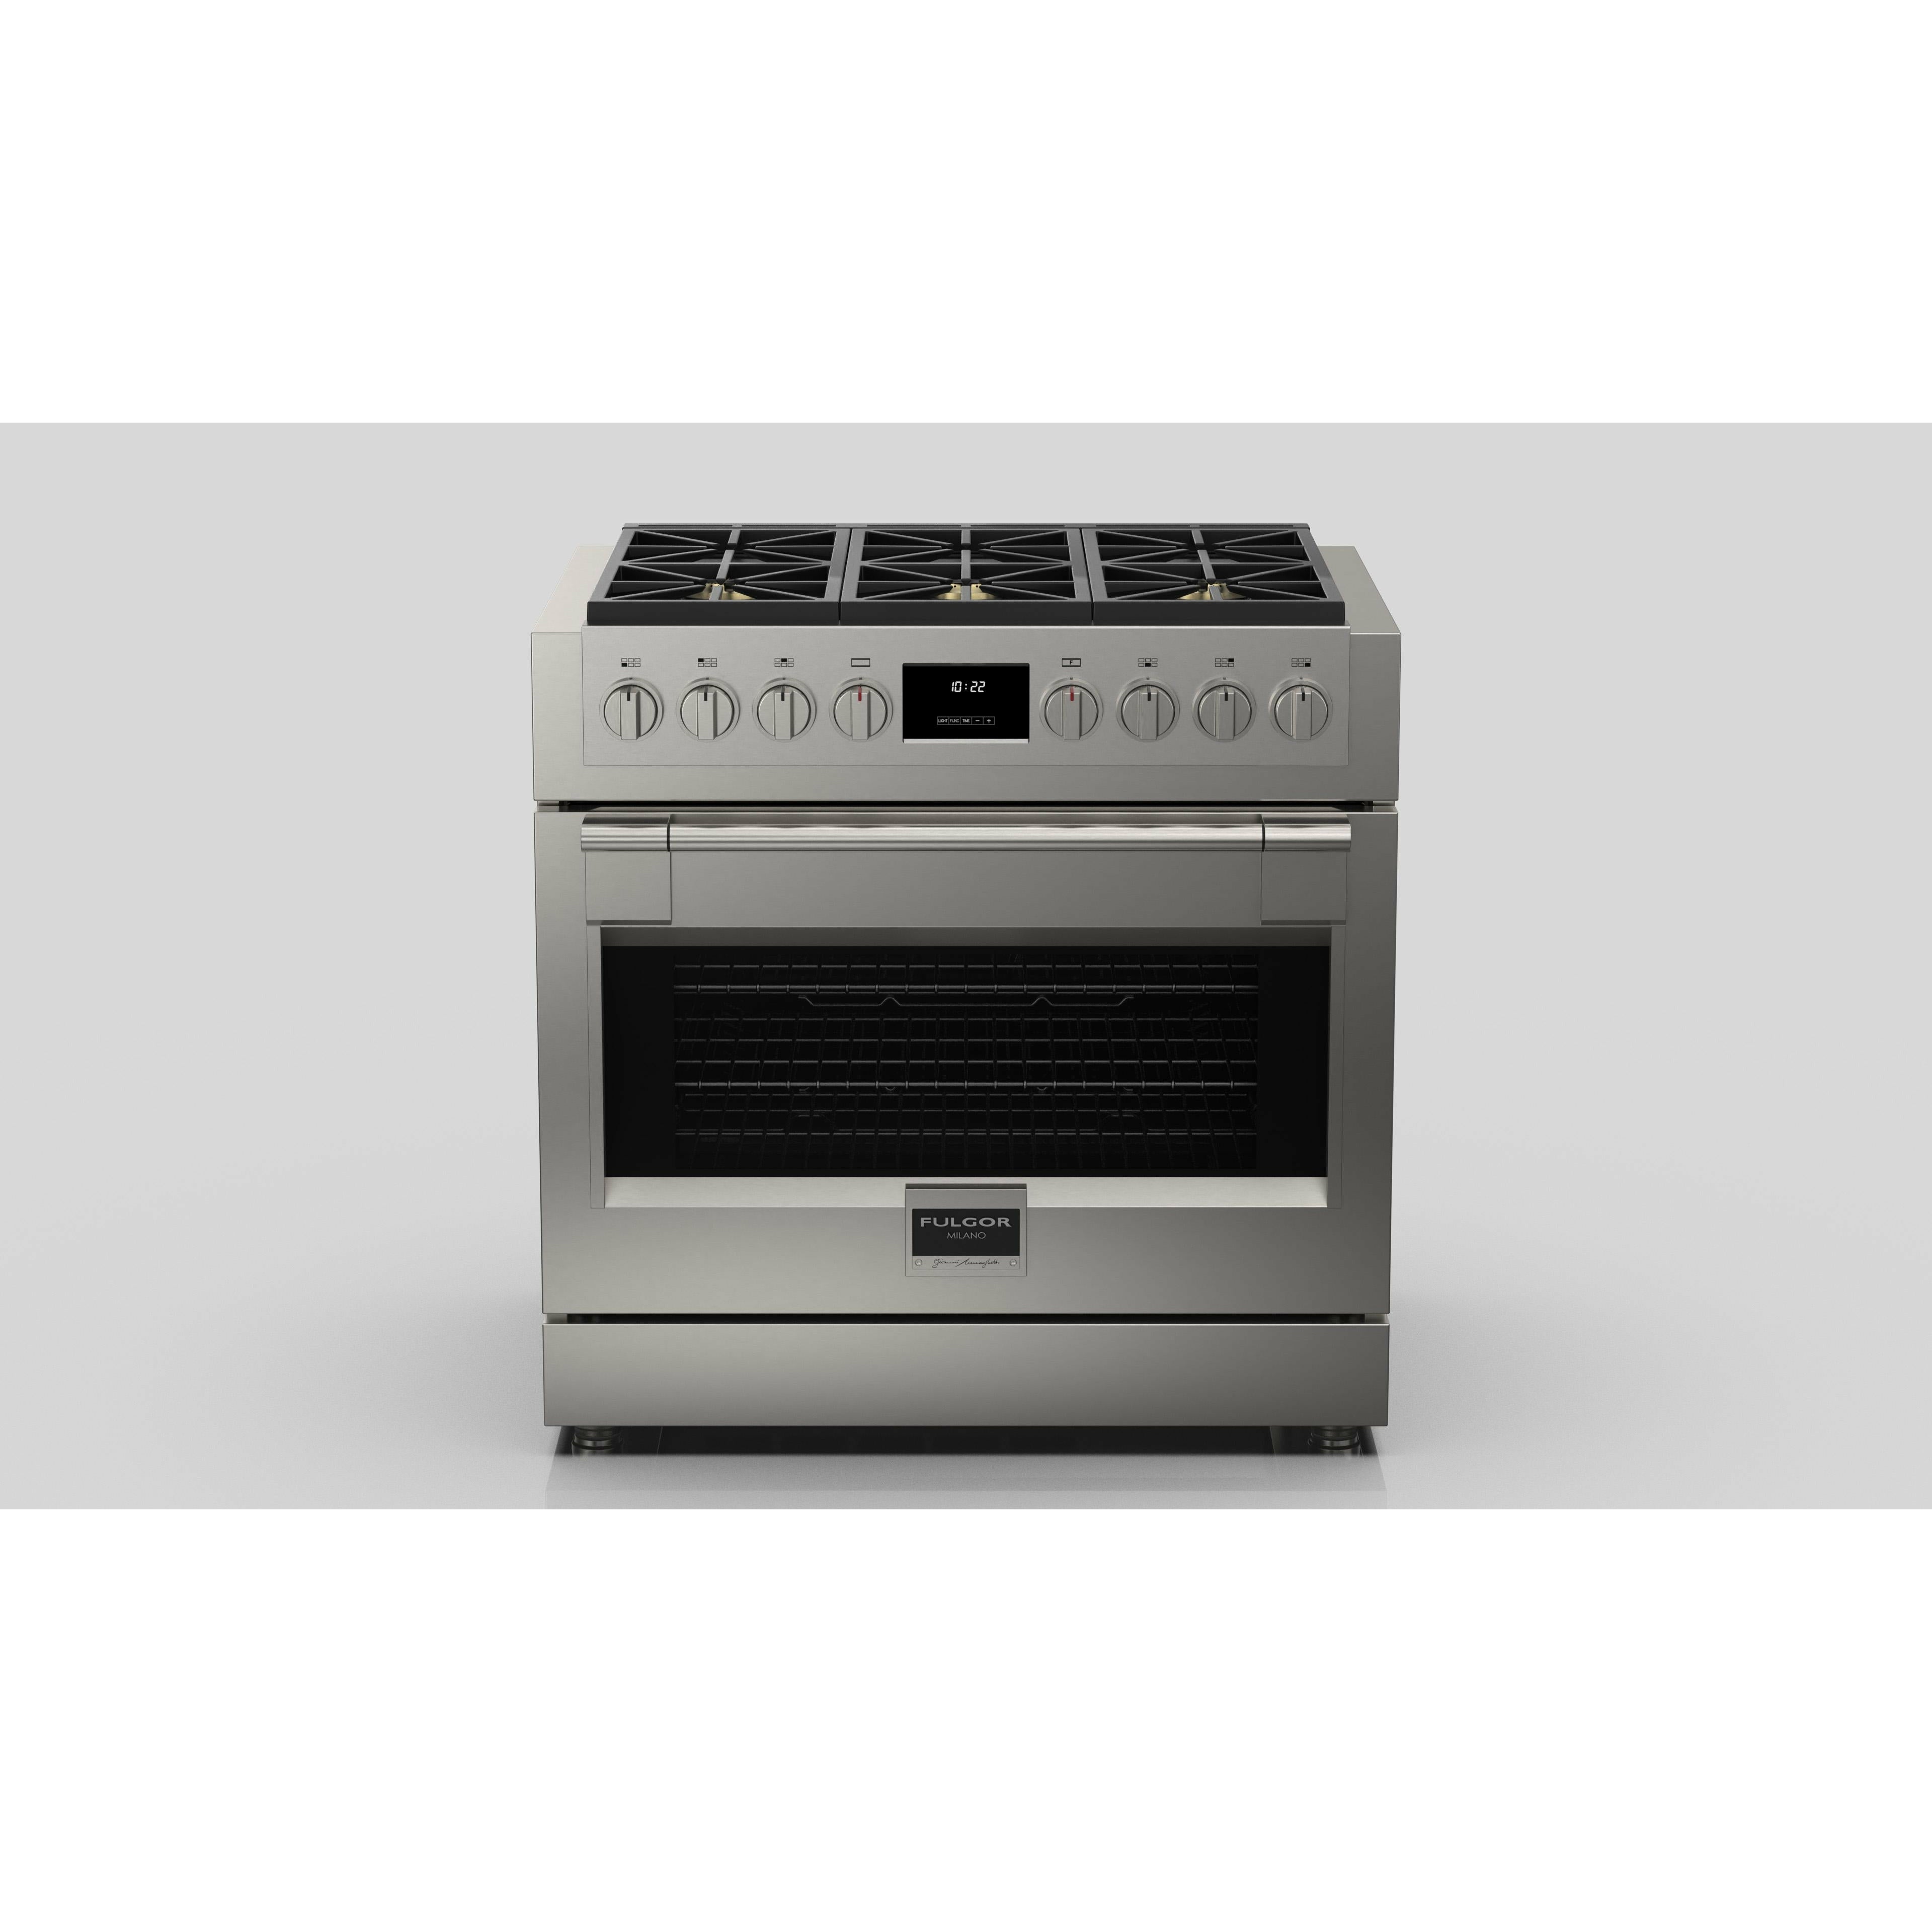 Fulgor Milano 36" Professional Gas Range with 6 Dual-Flame Burners, 5.7 cu. ft. Capacity, Stainless Steel - F6PGR366S2